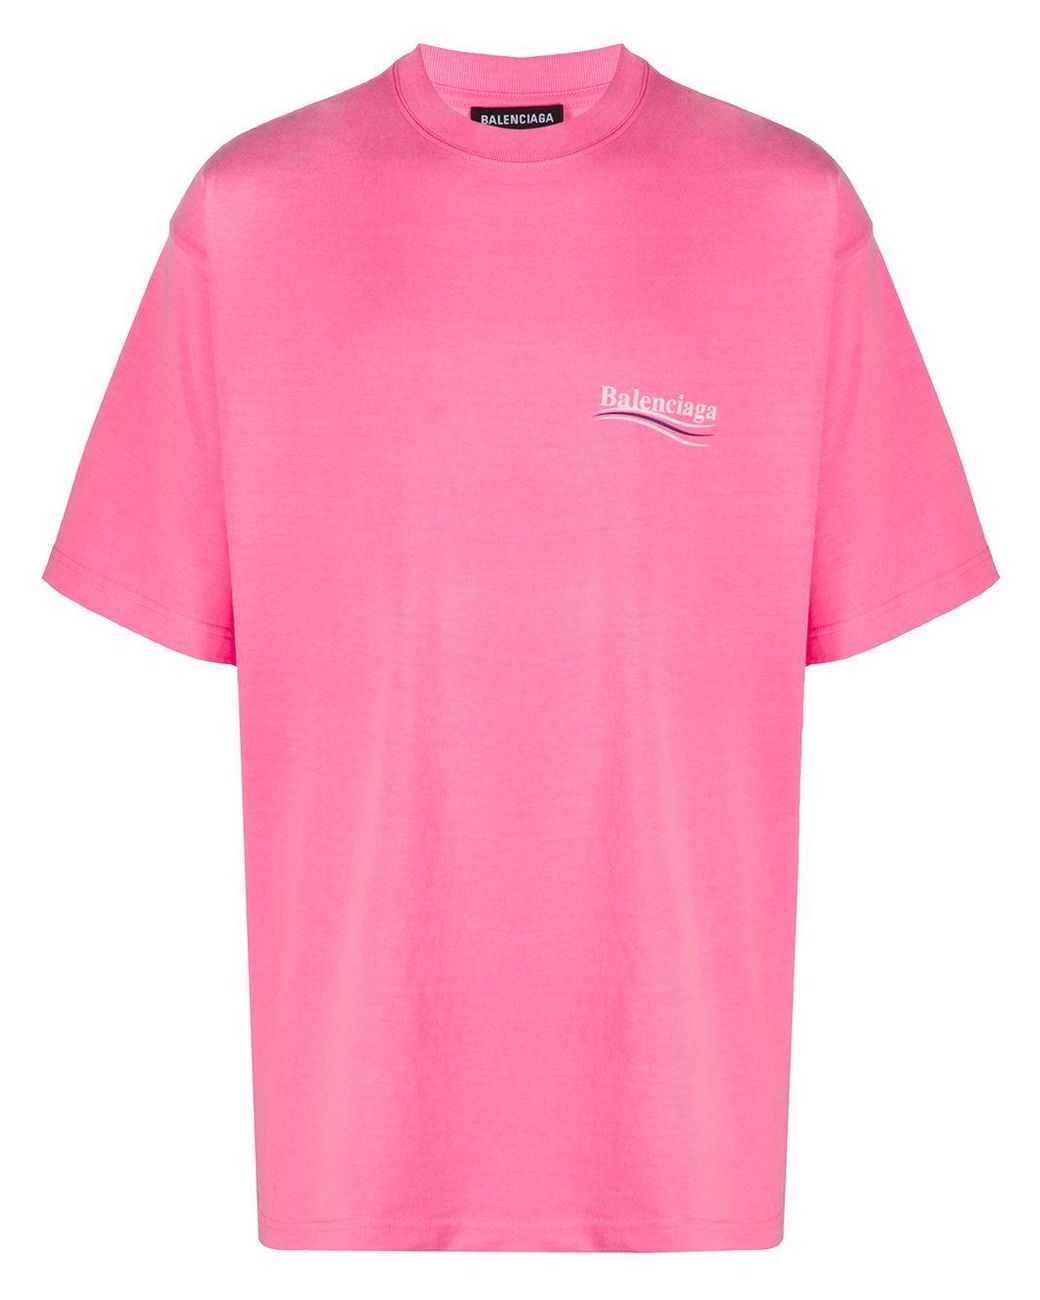 Balenciaga Cotton Oversized Political Campaign T-shirt in Pink for Men